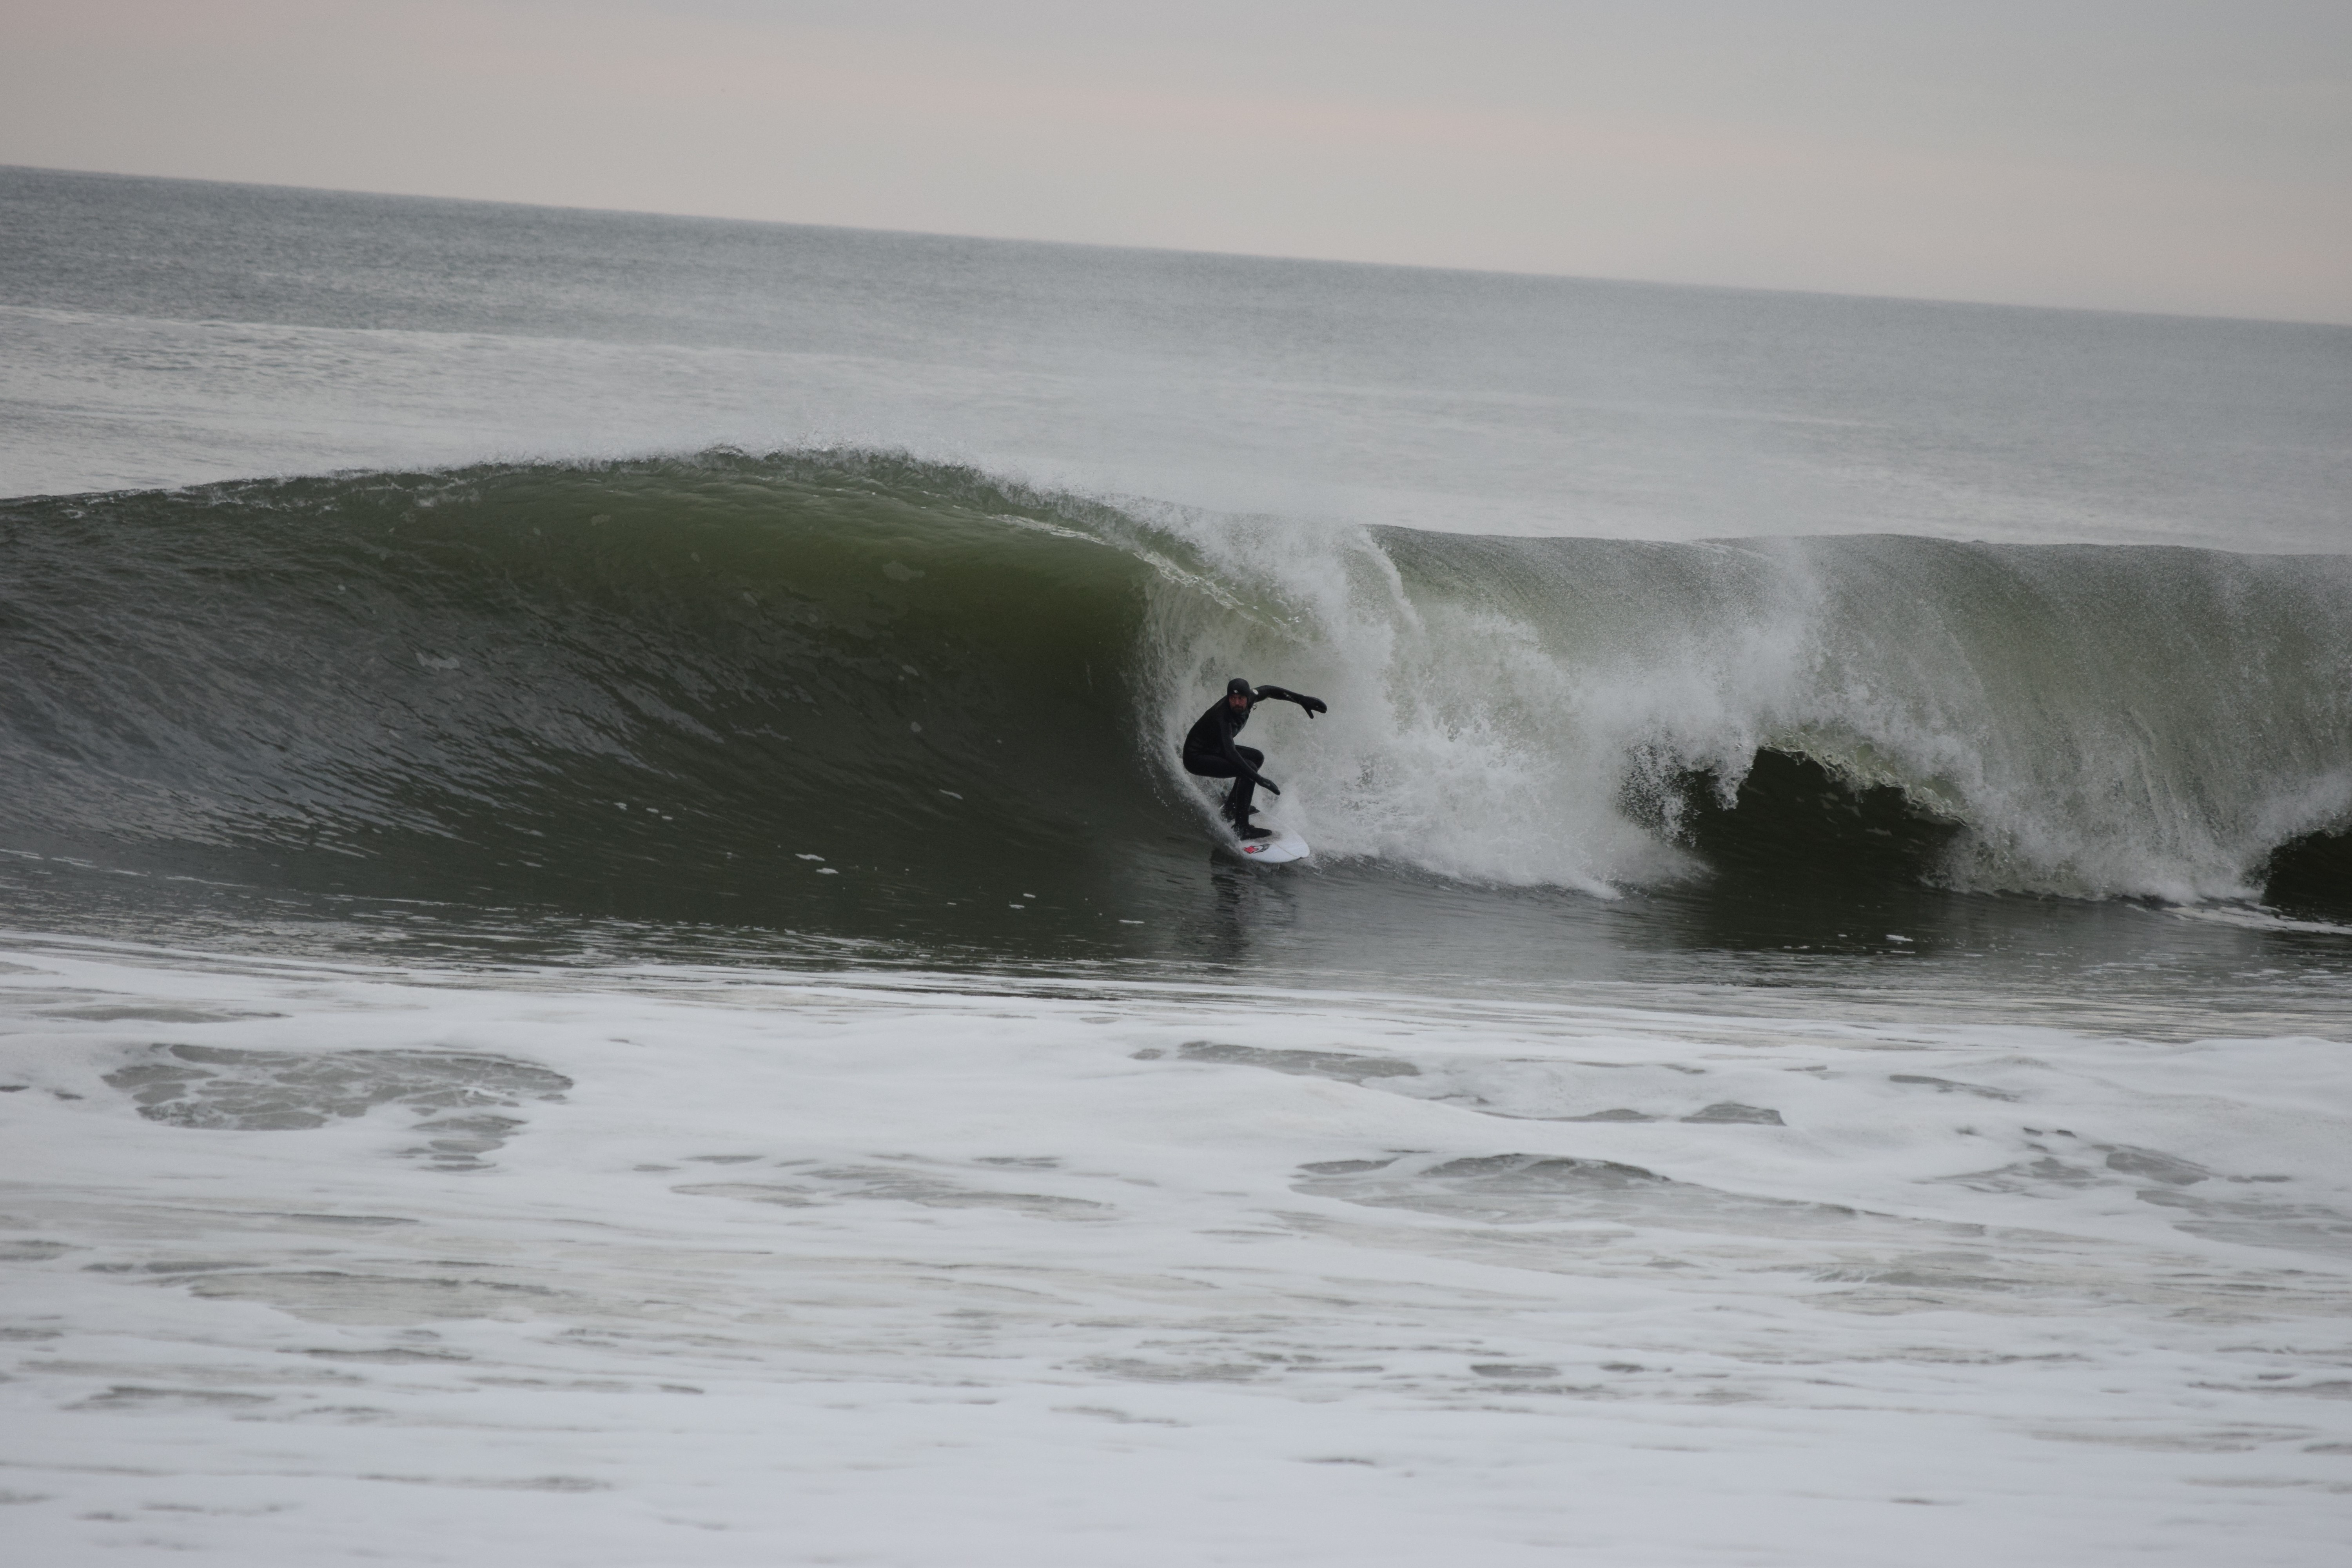 8 weeks after surgery, dropping in to a big swell on the NJ shore.  He had a displaced femoral neck fracture from a skateboarding accident in Denver, while visiting CO, requiring emergent surgery and internal screw fixation.